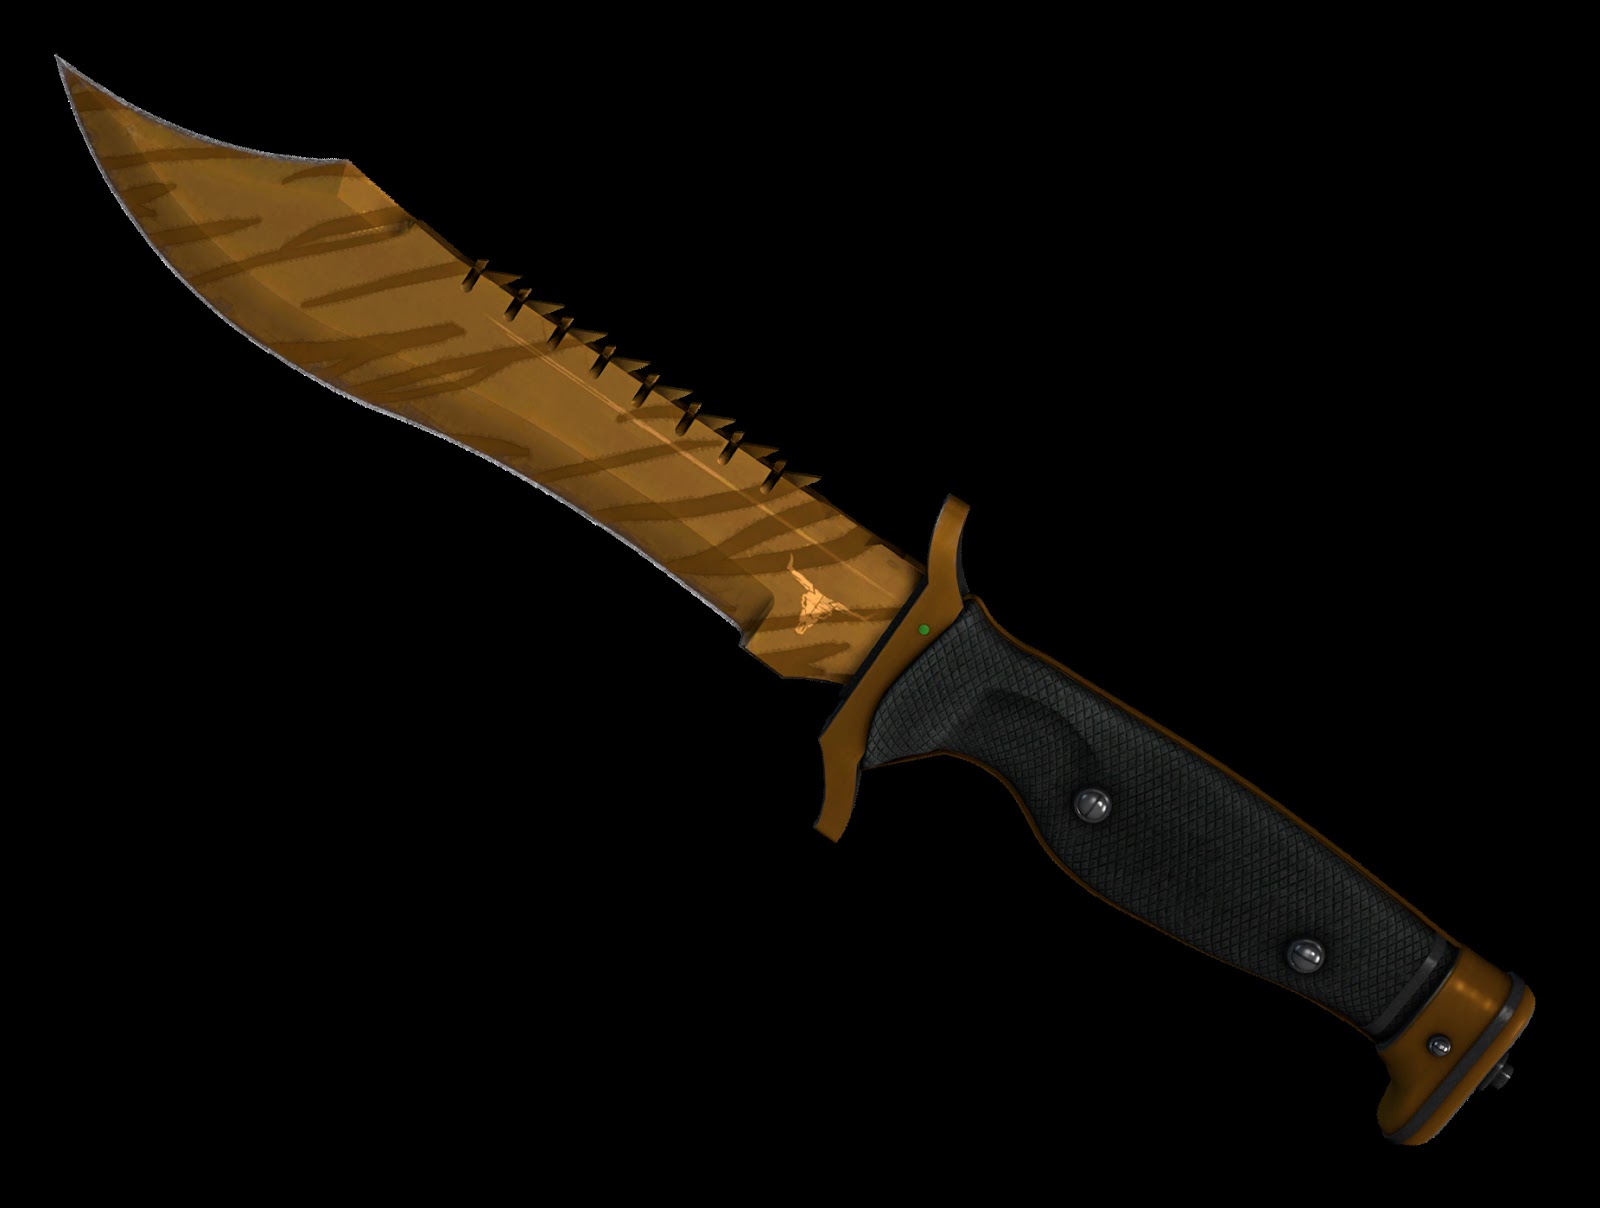 Tiger Tooth has a drop chance of 0.26%.